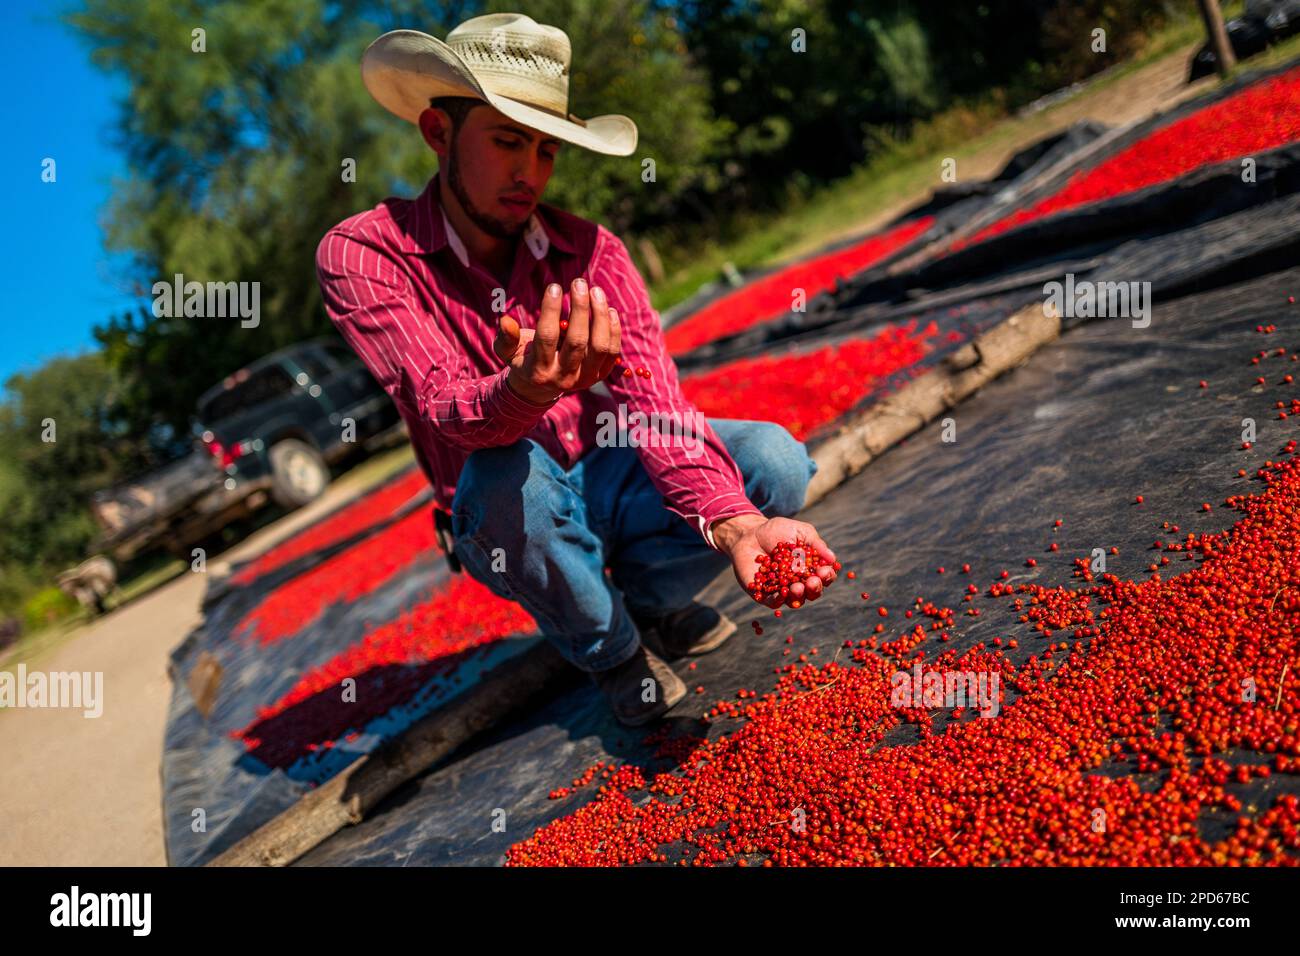 A young Mexican rancher checks chiltepin peppers, a wild variety of chili pepper, during the sun-drying process on a farm in Baviácora, Mexico. Stock Photo